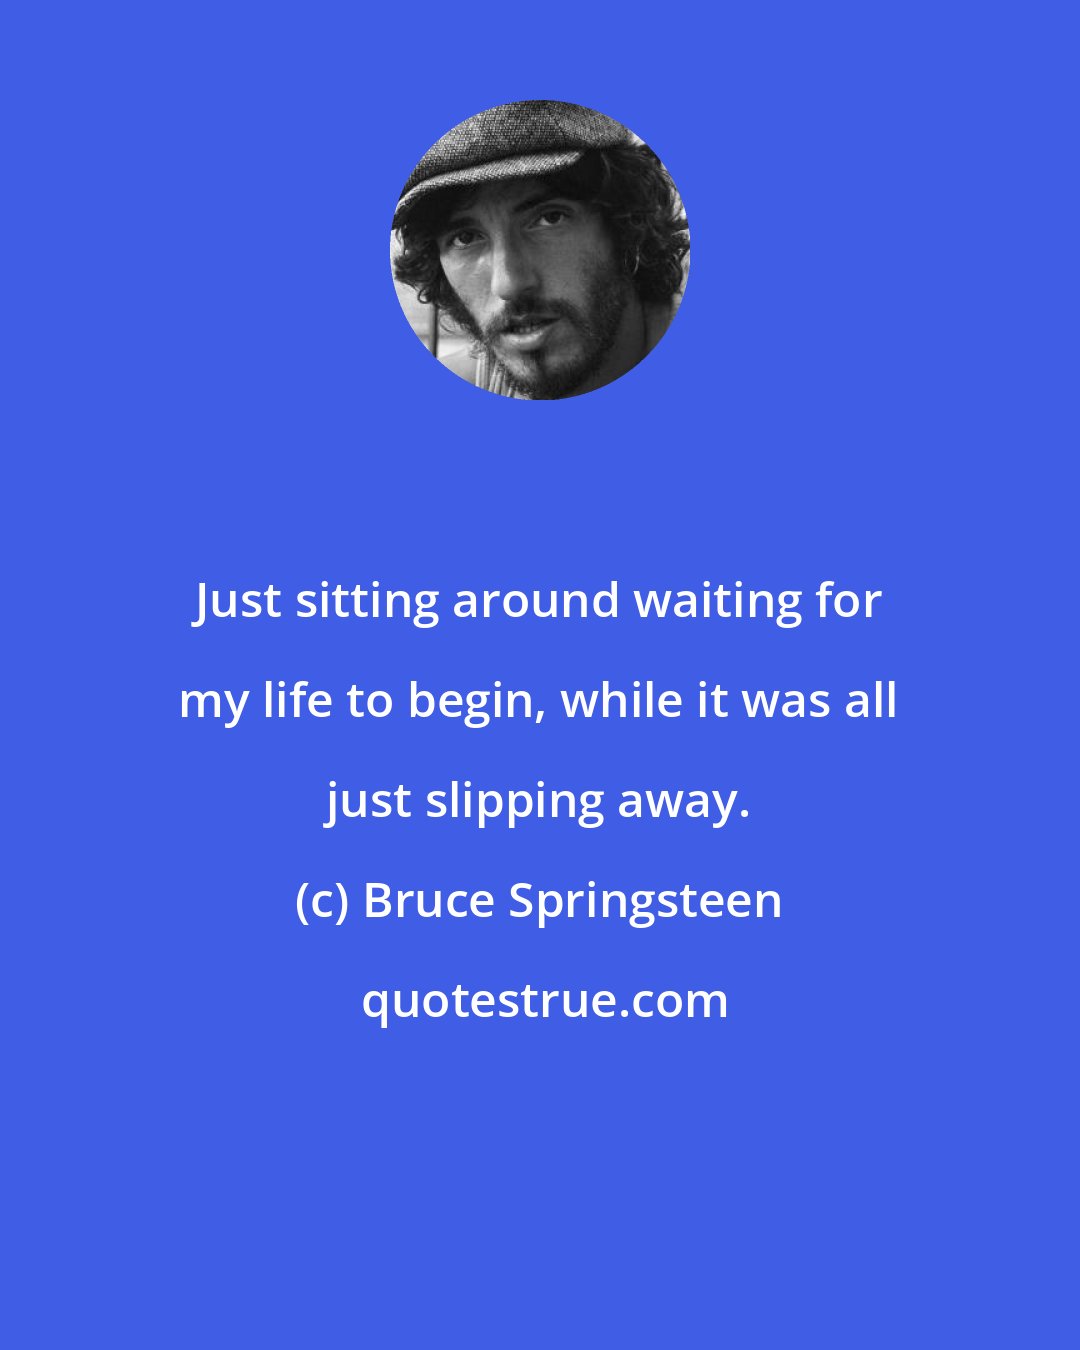 Bruce Springsteen: Just sitting around waiting for my life to begin, while it was all just slipping away.